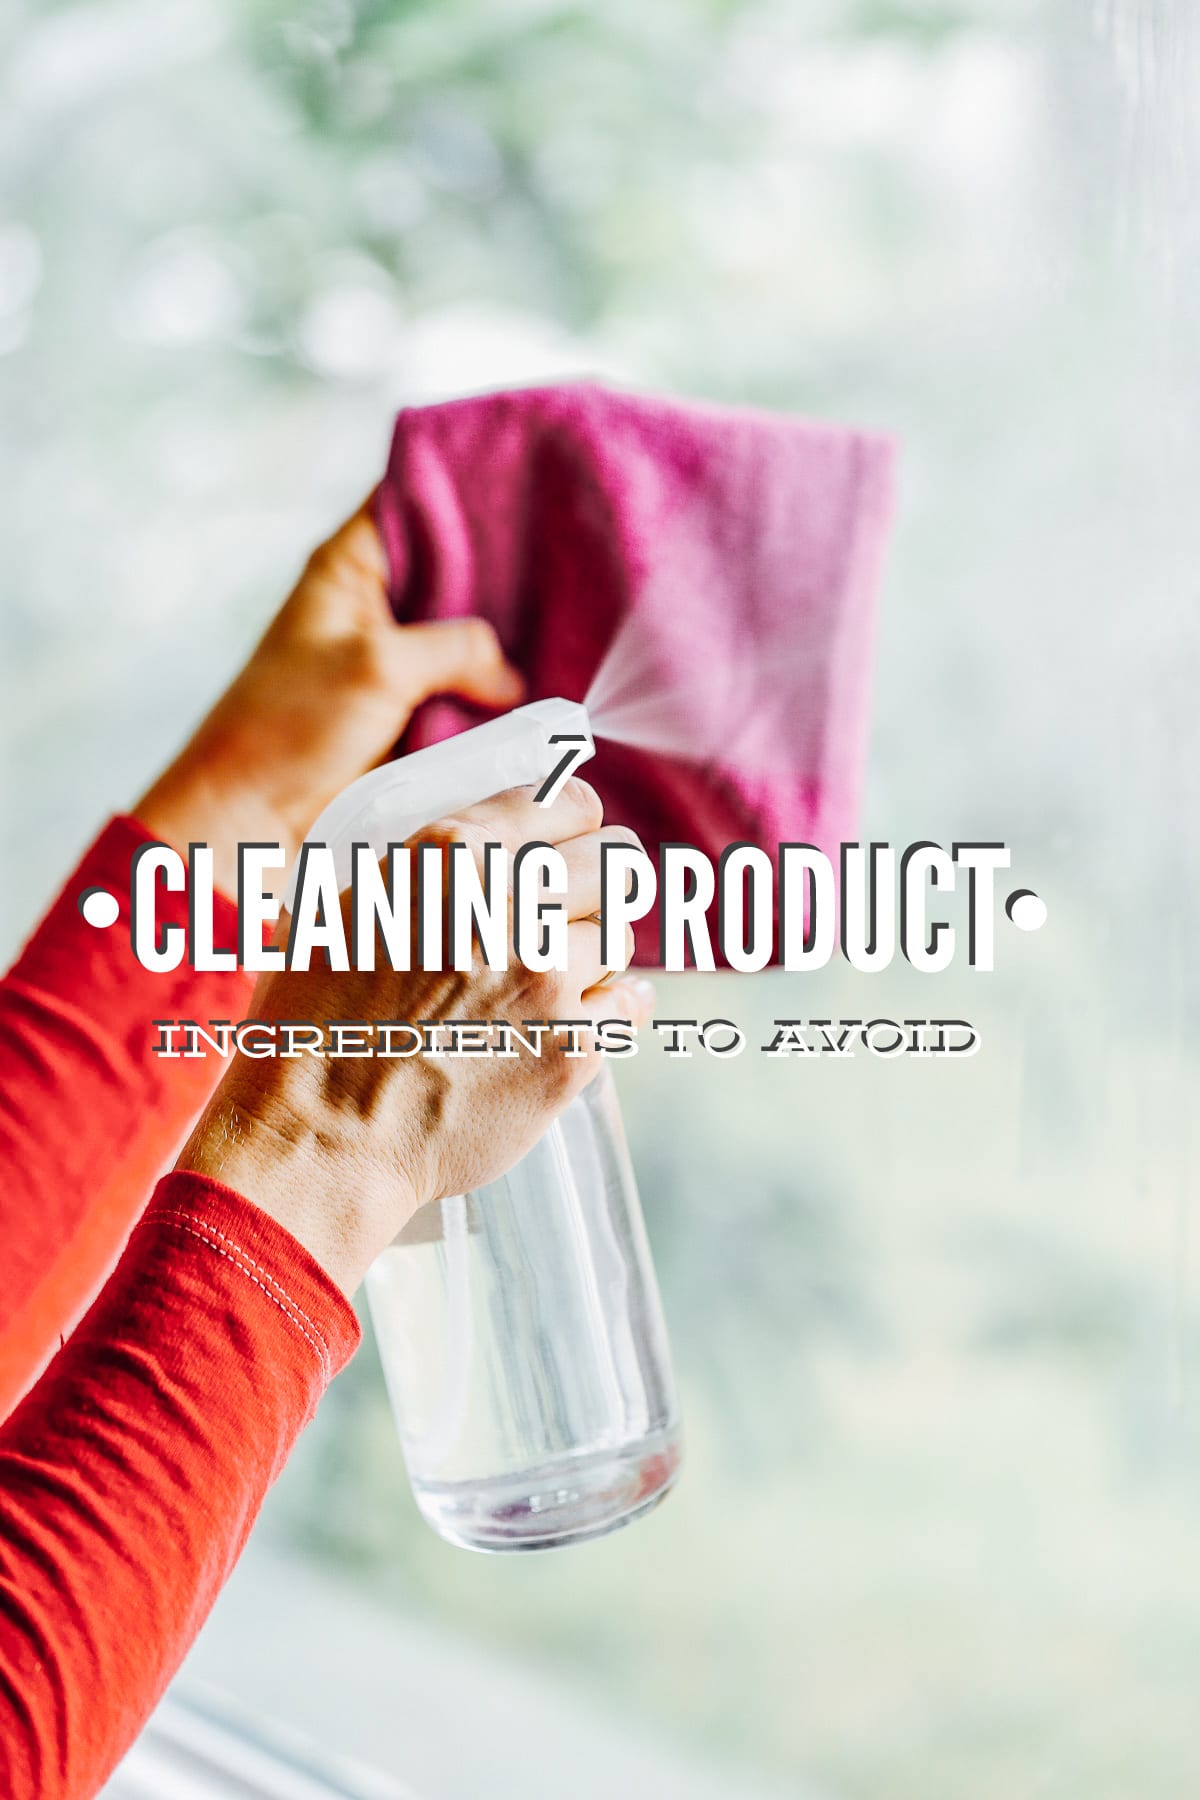 7 Cleaning Product Ingredients to Avoid